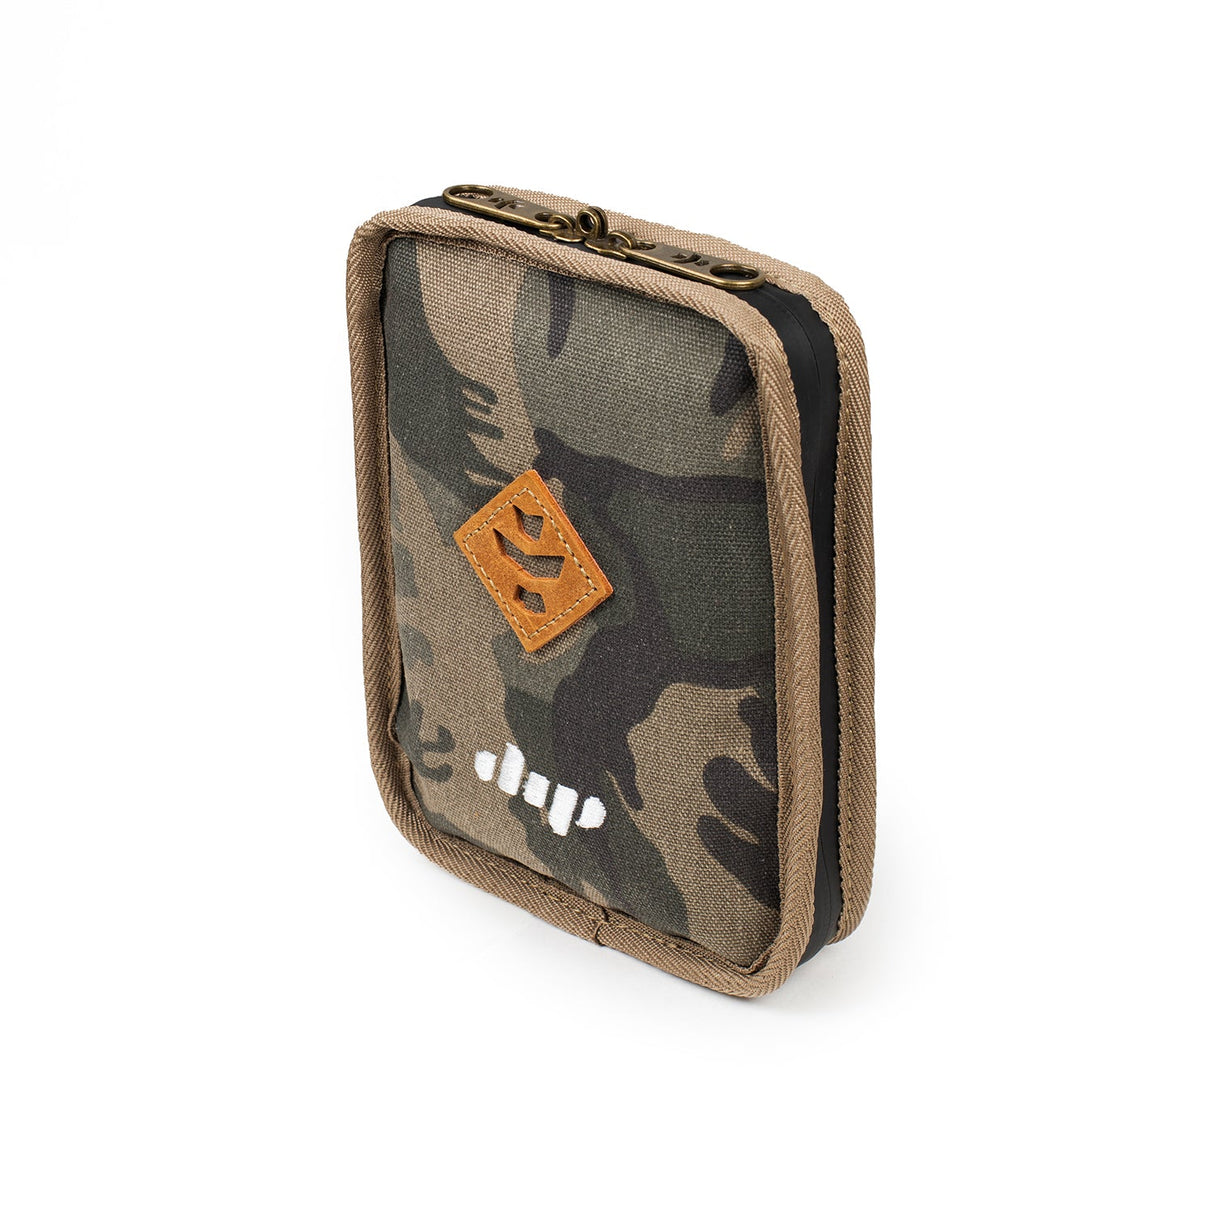 Revelry Supply The Dab Kit - Camouflage Smell Proof Case - Front View on White Background